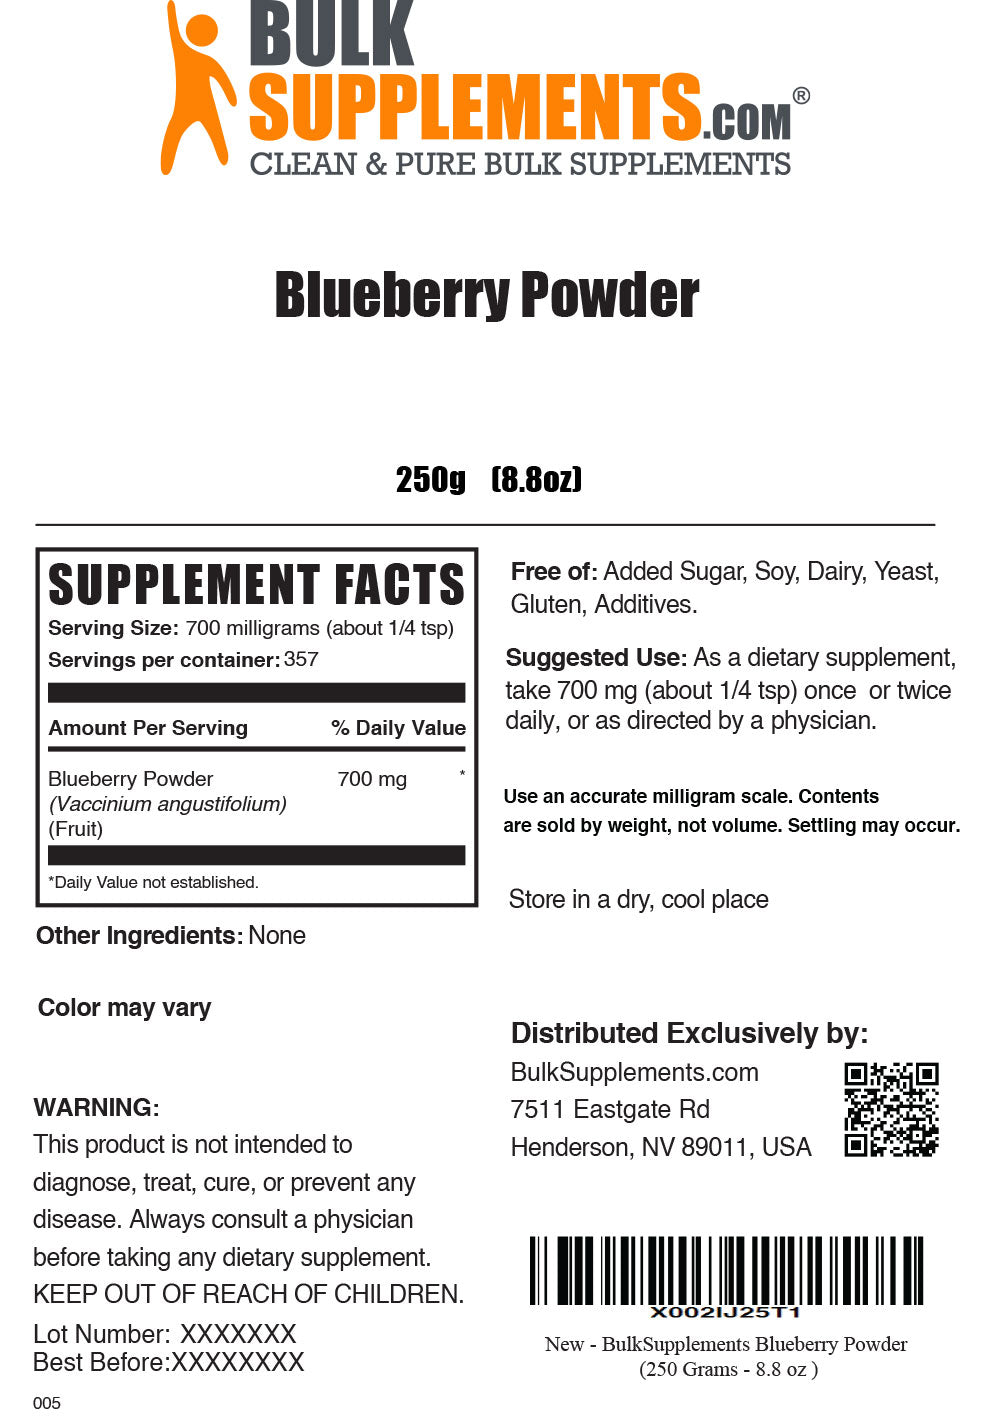 250g of Blueberry Powder Supplement Facts